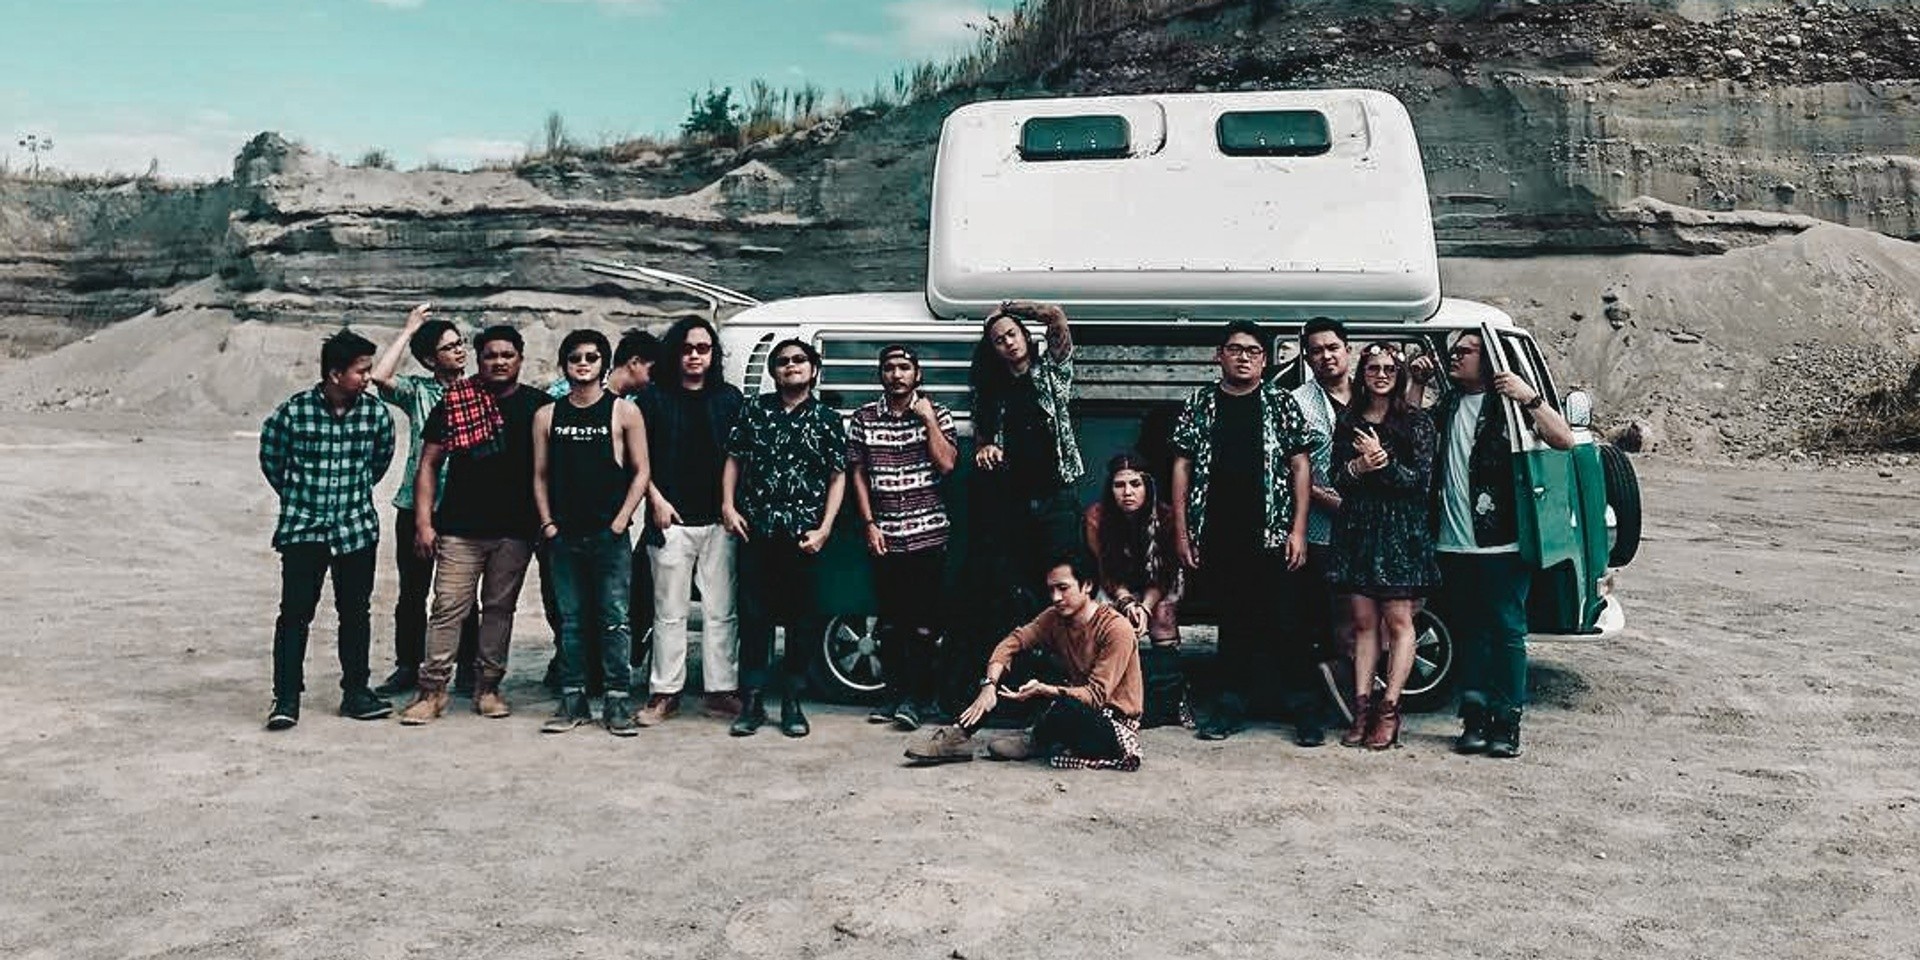 December Avenue, Gracenote, Autotelic collab 'Summer Song' is now on Spotify